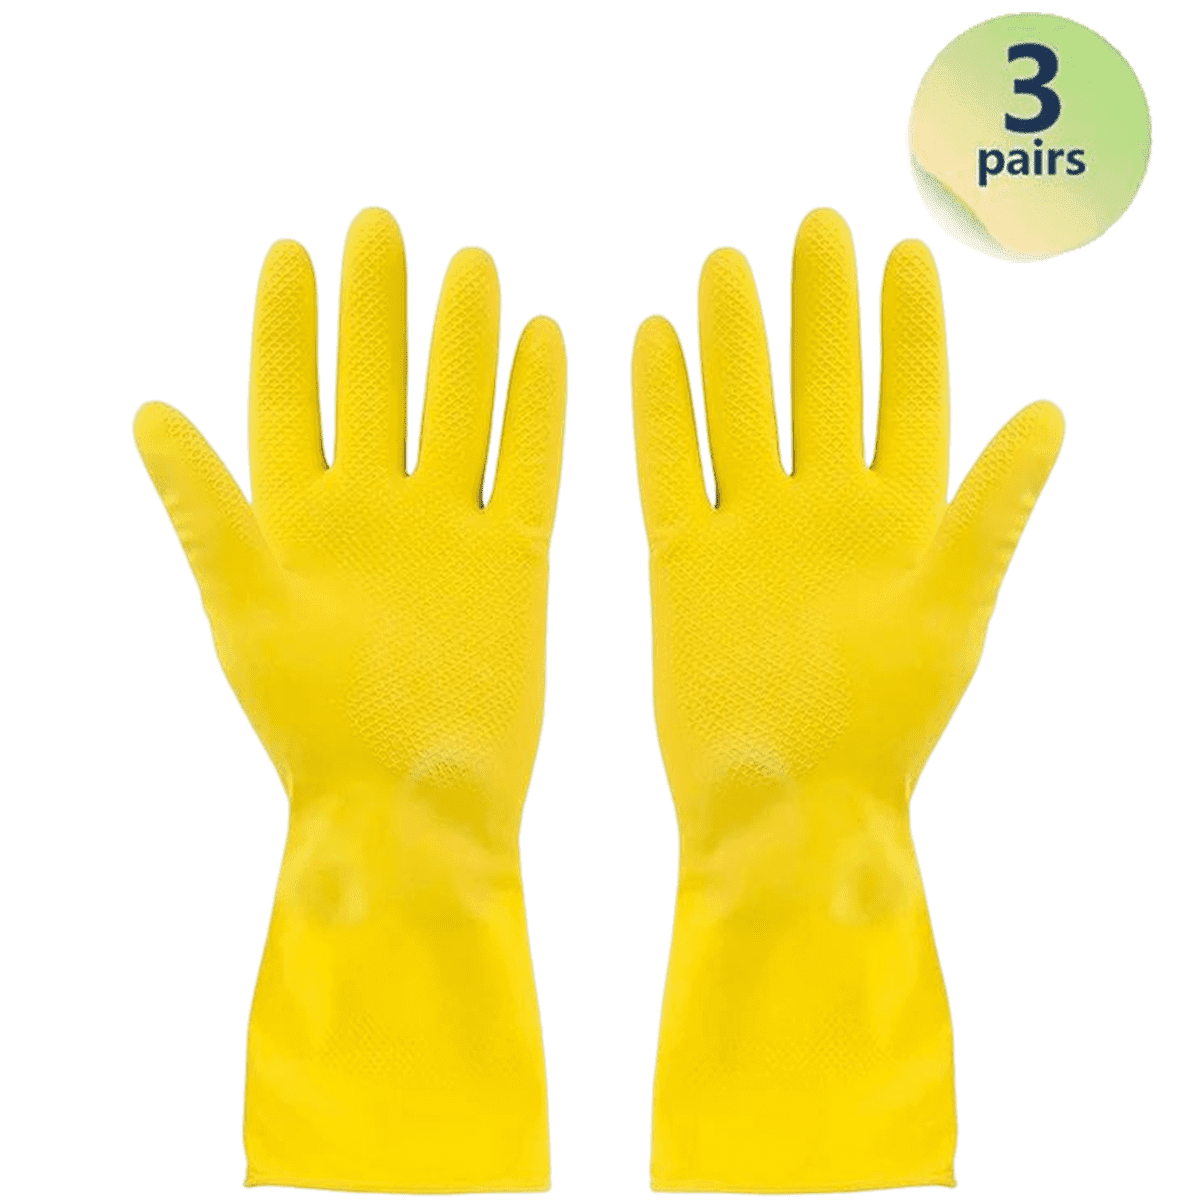 Generic 1 Pair Home Dusting Gloves Dish Washing Gloves Cleaning Gl @ Best  Price Online